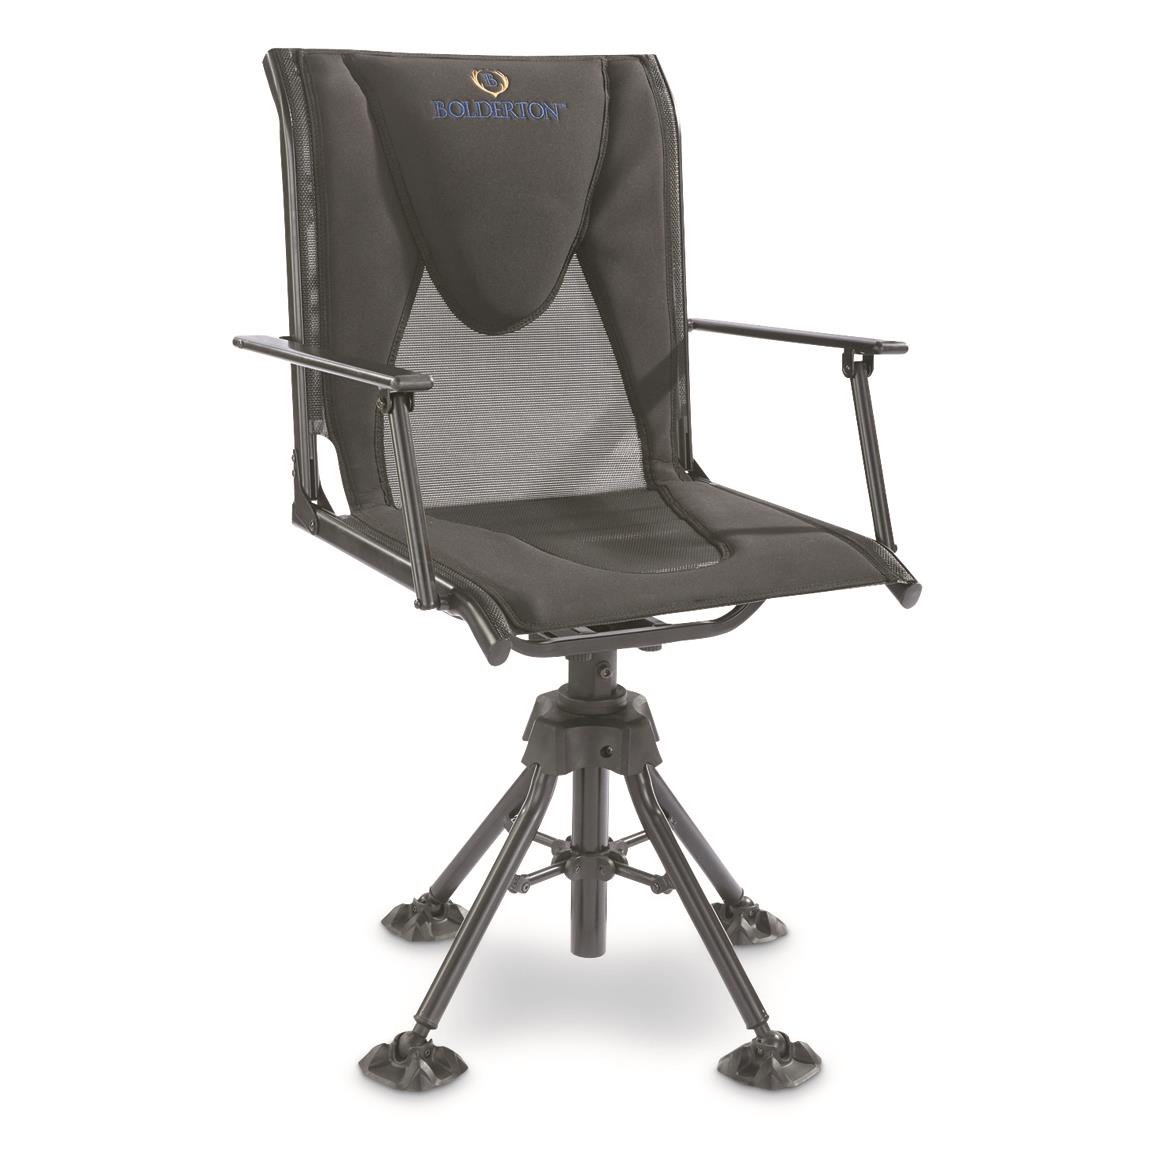 Bolderton 360 Comfort Swivel Hunting Blind Chair With Armrests 697303 Stools Chairs Seat Cushions At Sportsman S Guide